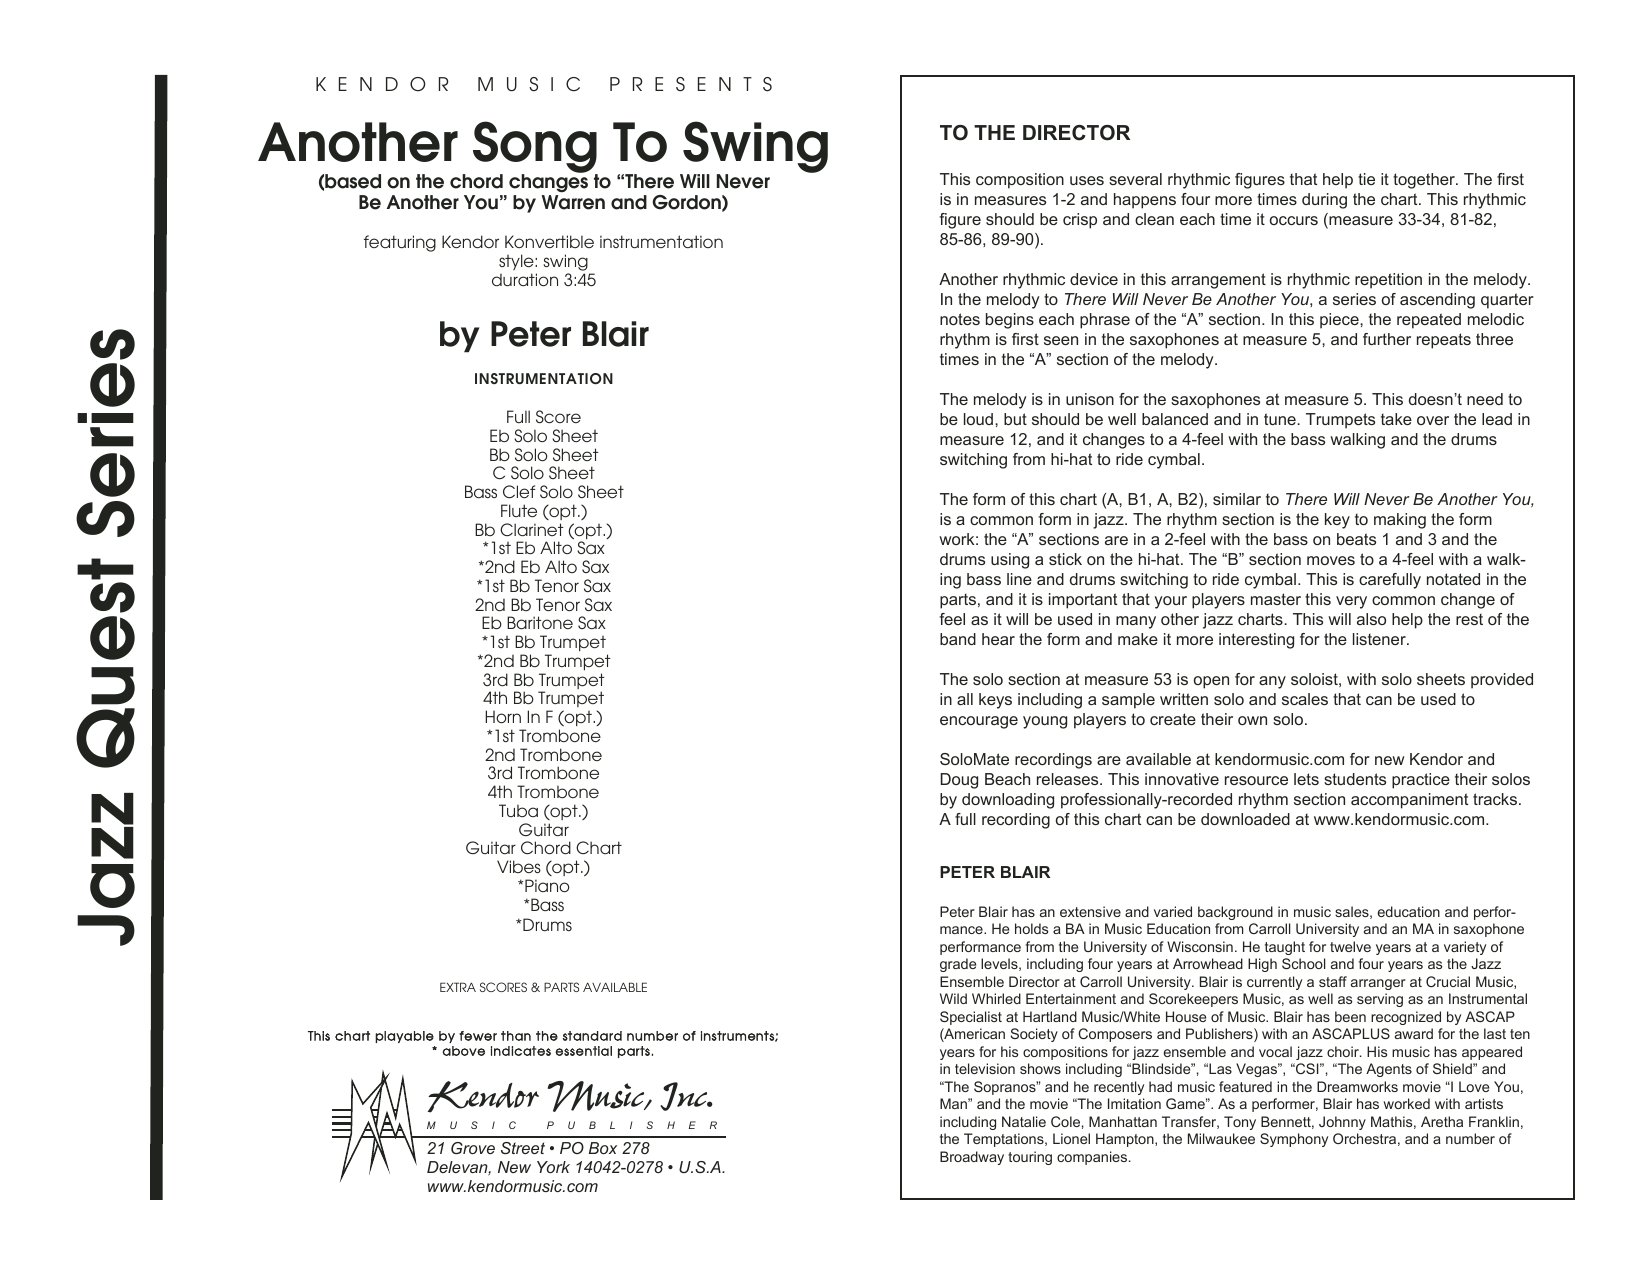 Download Peter Blair Another Song To Swing - Full Score Sheet Music